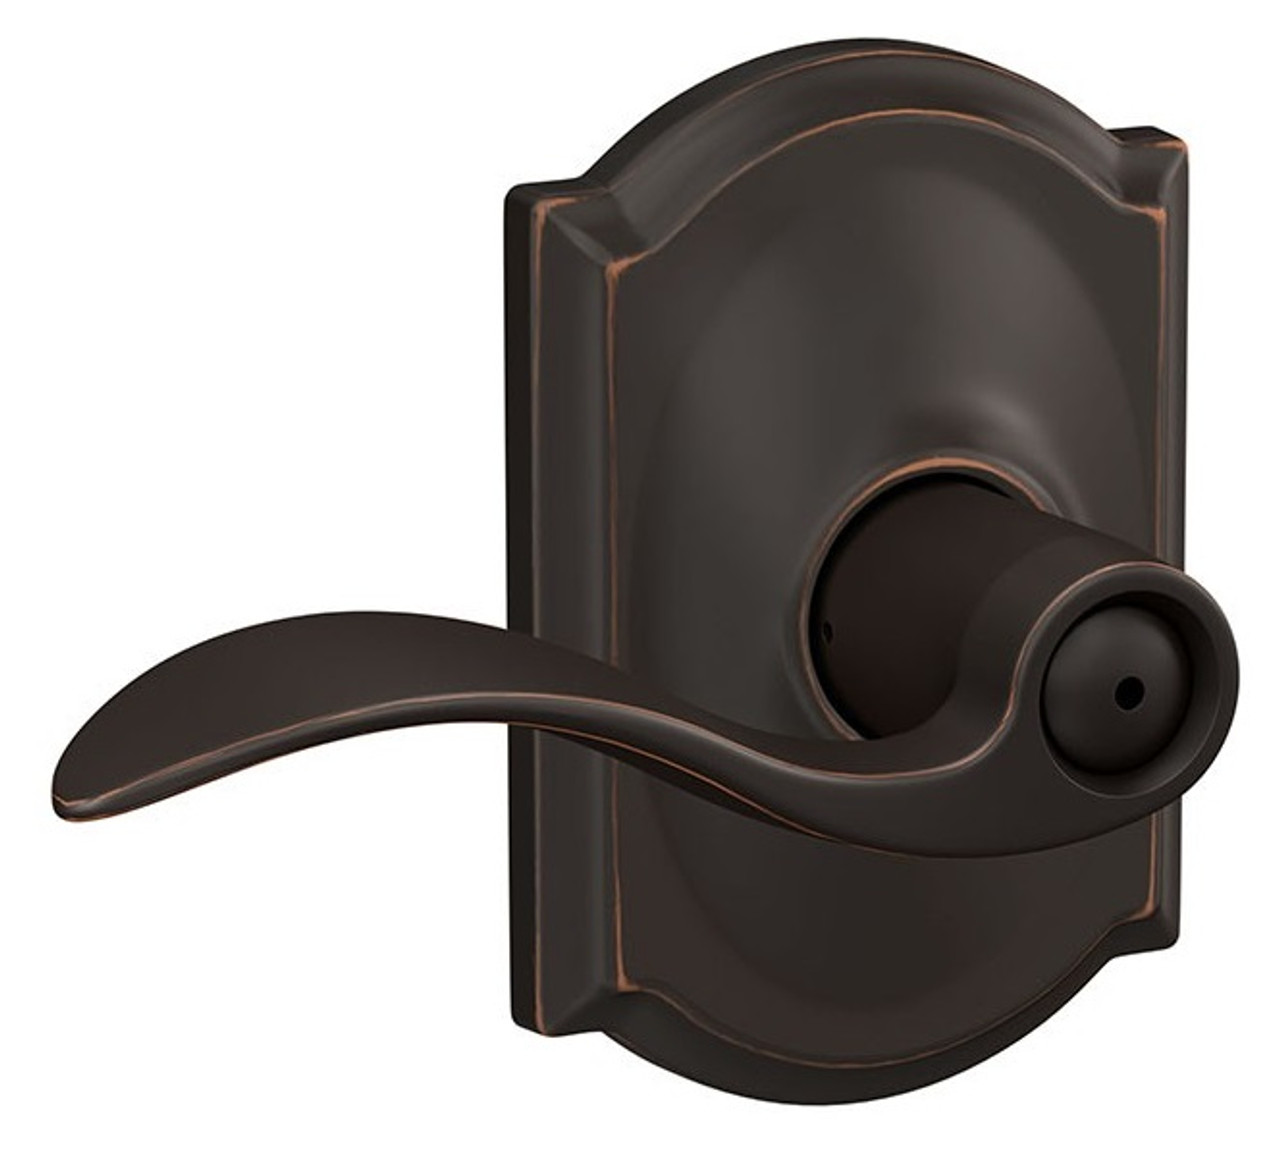 Schlage Privacy Accent Lever Door Lock with Camelot Trim